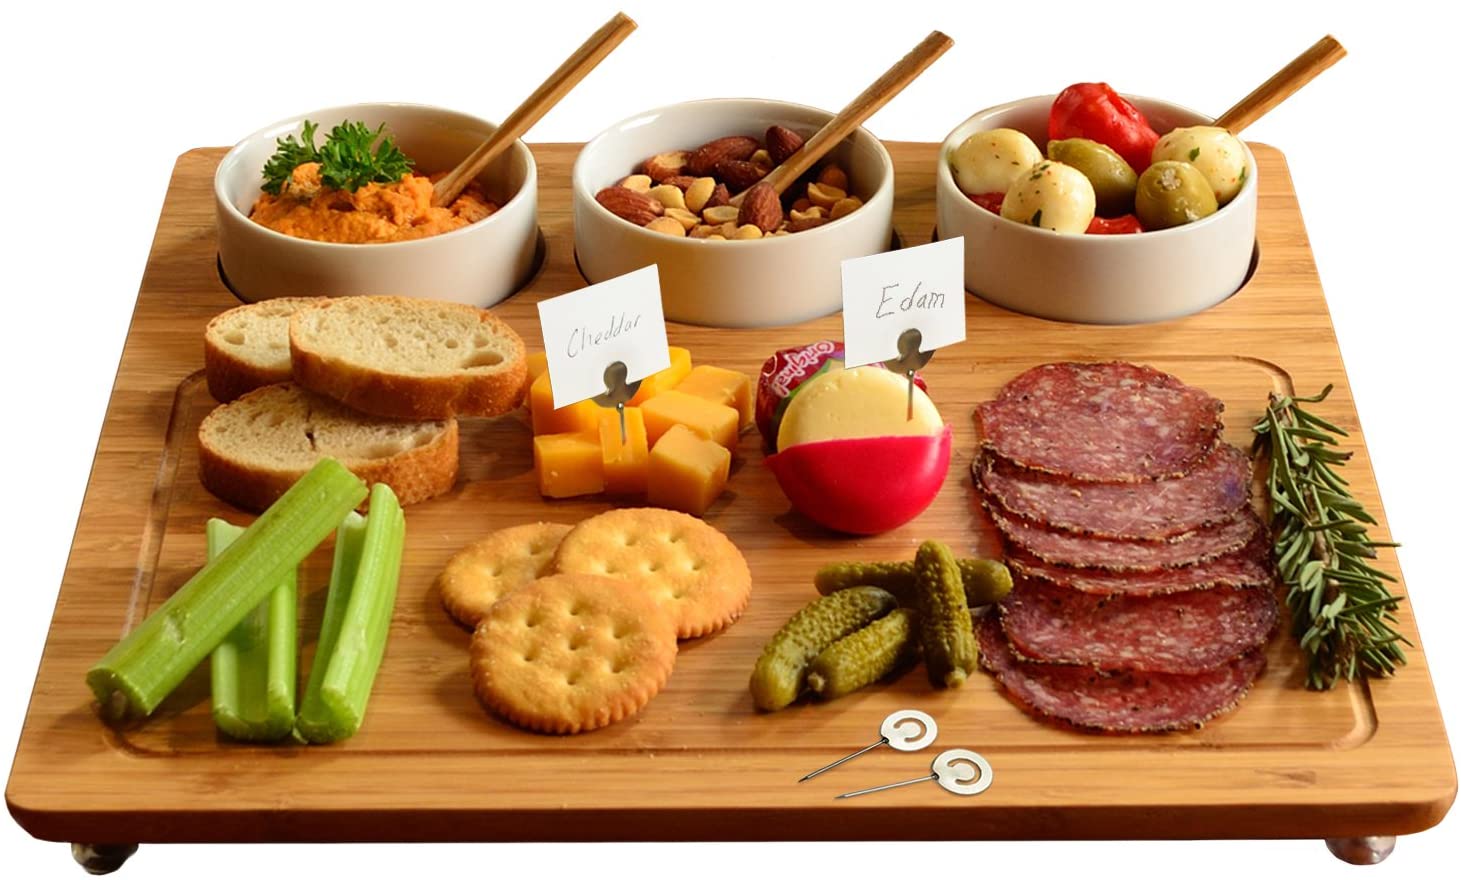 Low price for China Factory Price Cheese Cutting Board Set and Cheese Serving Platter with 3 Ceramic Bowls and Bamboo Spoons Featured Image